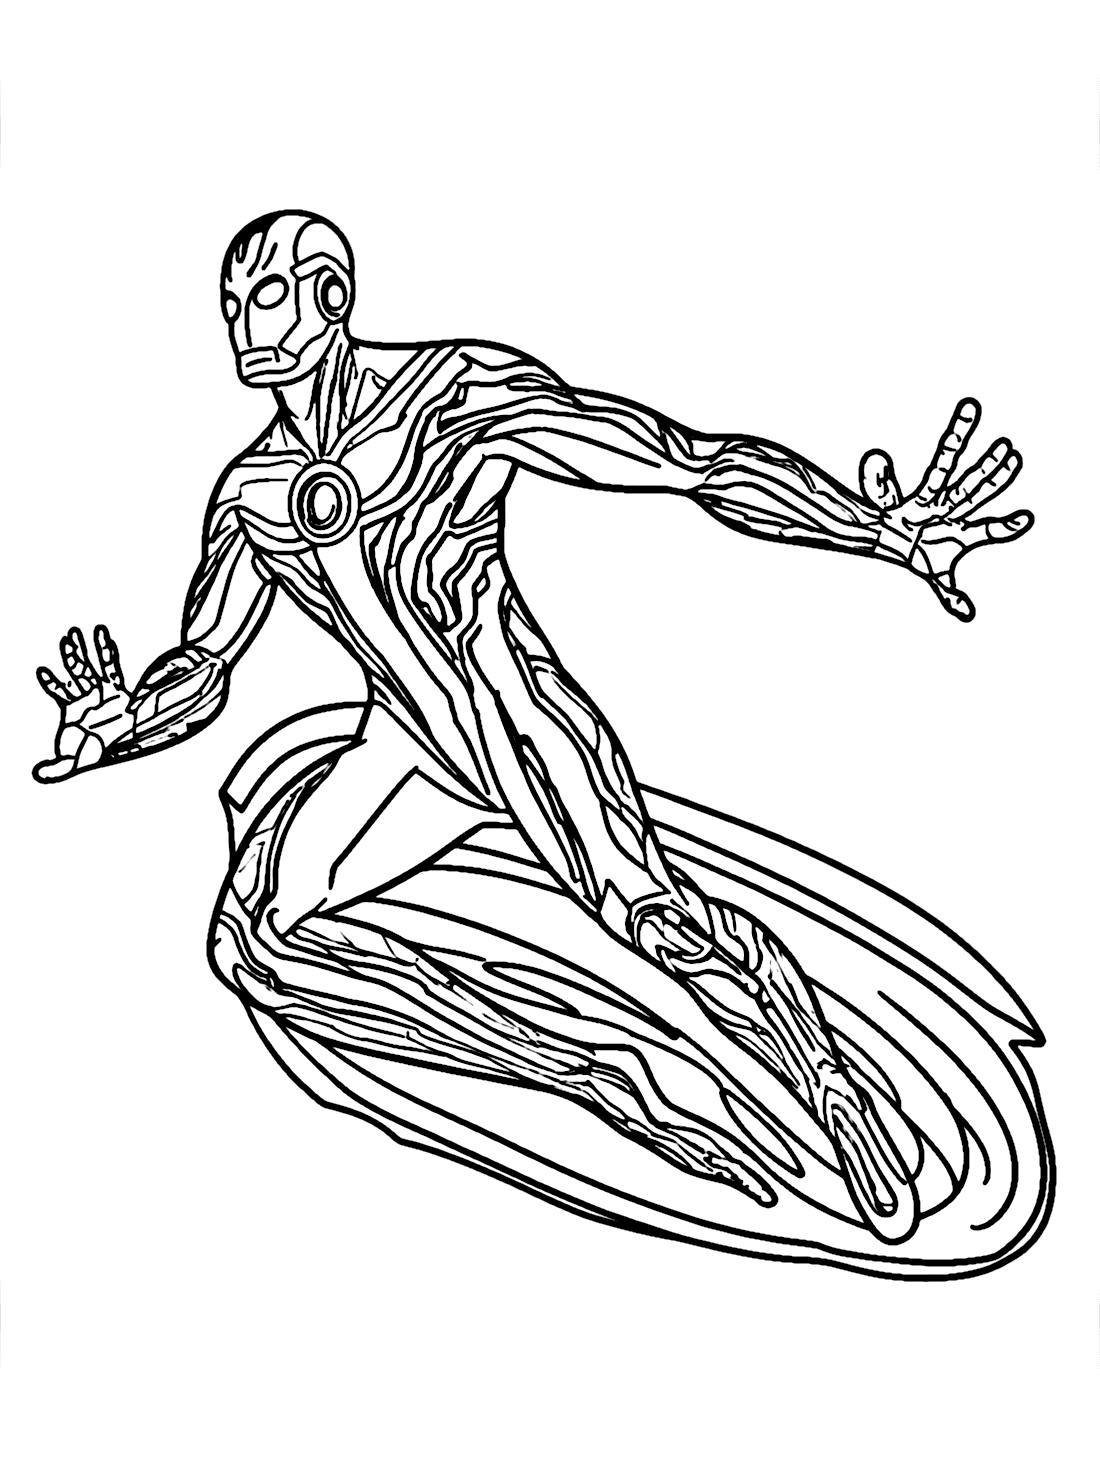 Silver surfer powers